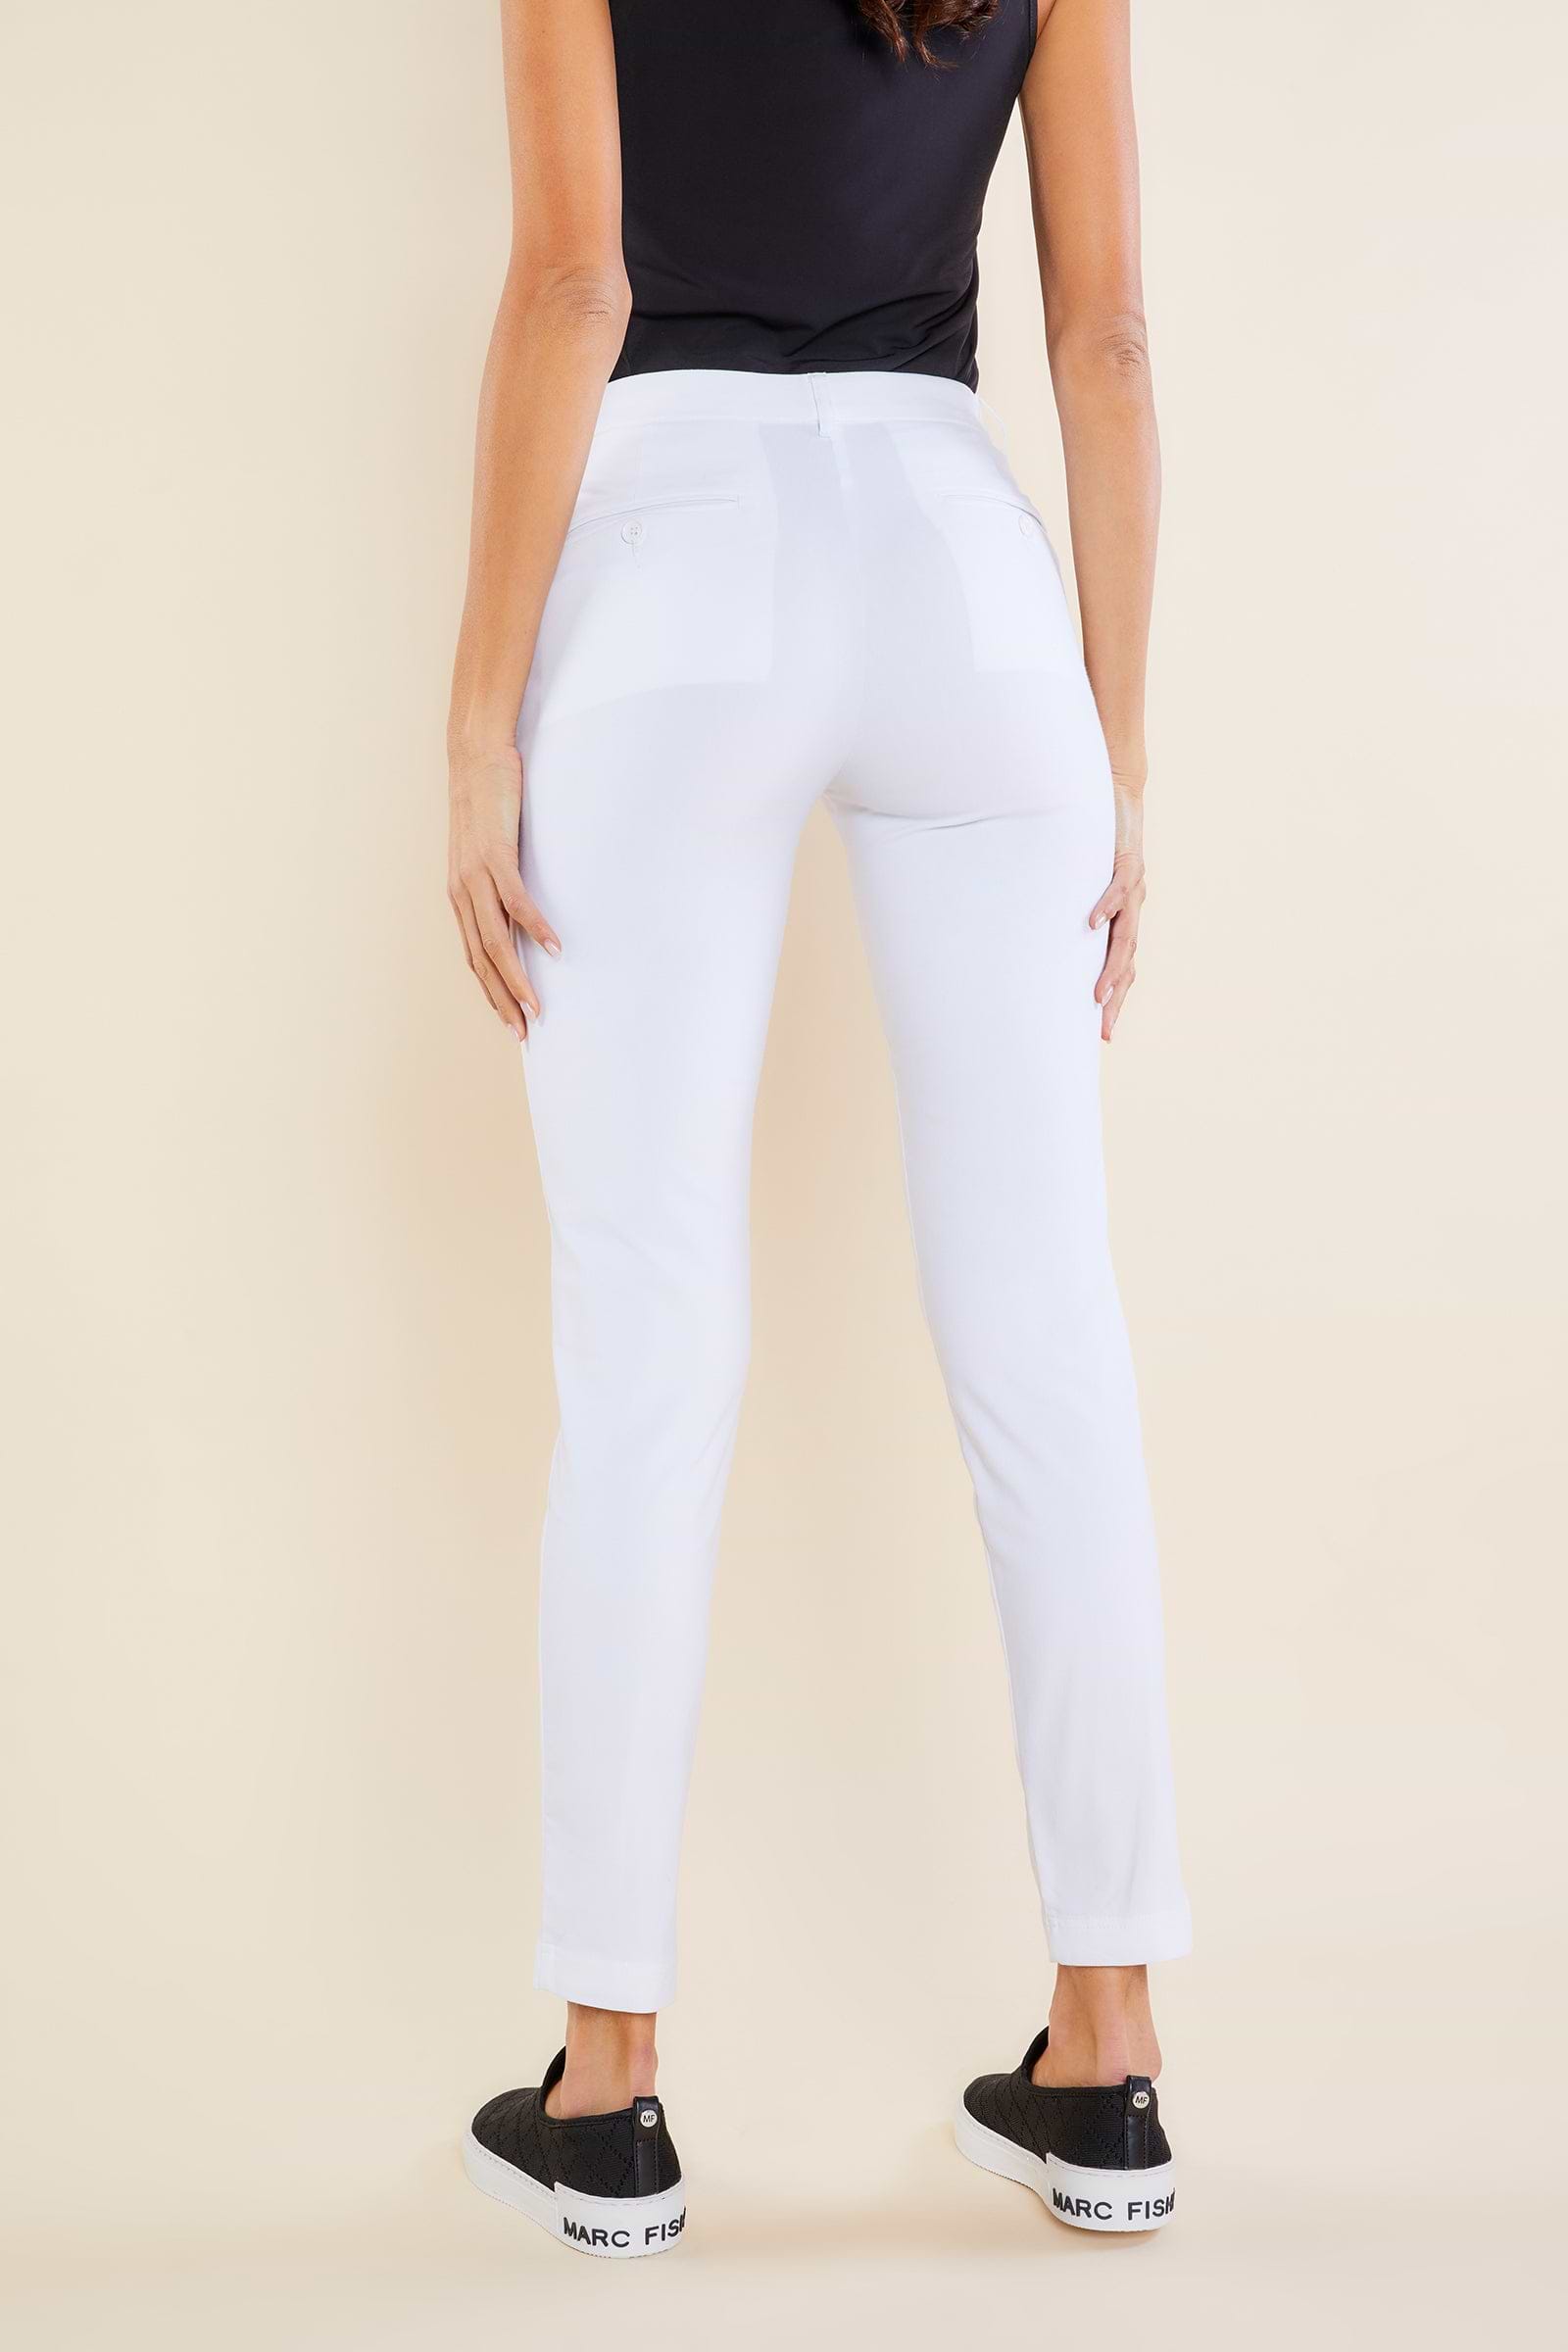 The Best Travel Pants. Back Profile of the Thea Curvy Pant in White.